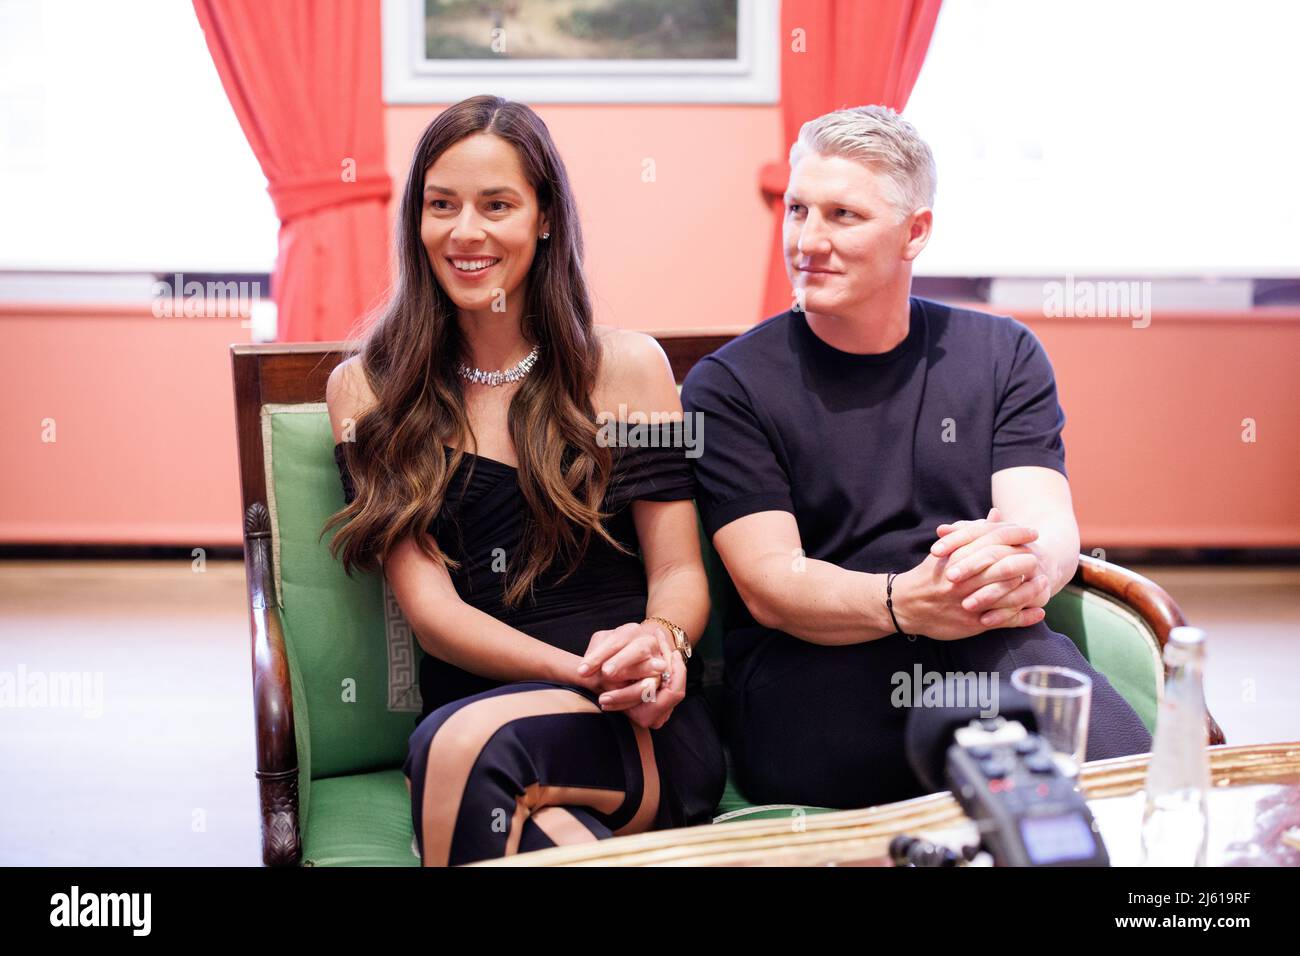 Munich, Germany. 26th Apr, 2022. EXCLUSIVE - Bastian Schweinsteiger, former German soccer player (r), and his wife Ana Ivanovic, Serbian former tennis player, give an interview on the sidelines of the Best Brands Awards 2022 ceremony at the Bayerischer Hof. Credit: Matthias Balk/dpa/Alamy Live News Stock Photo